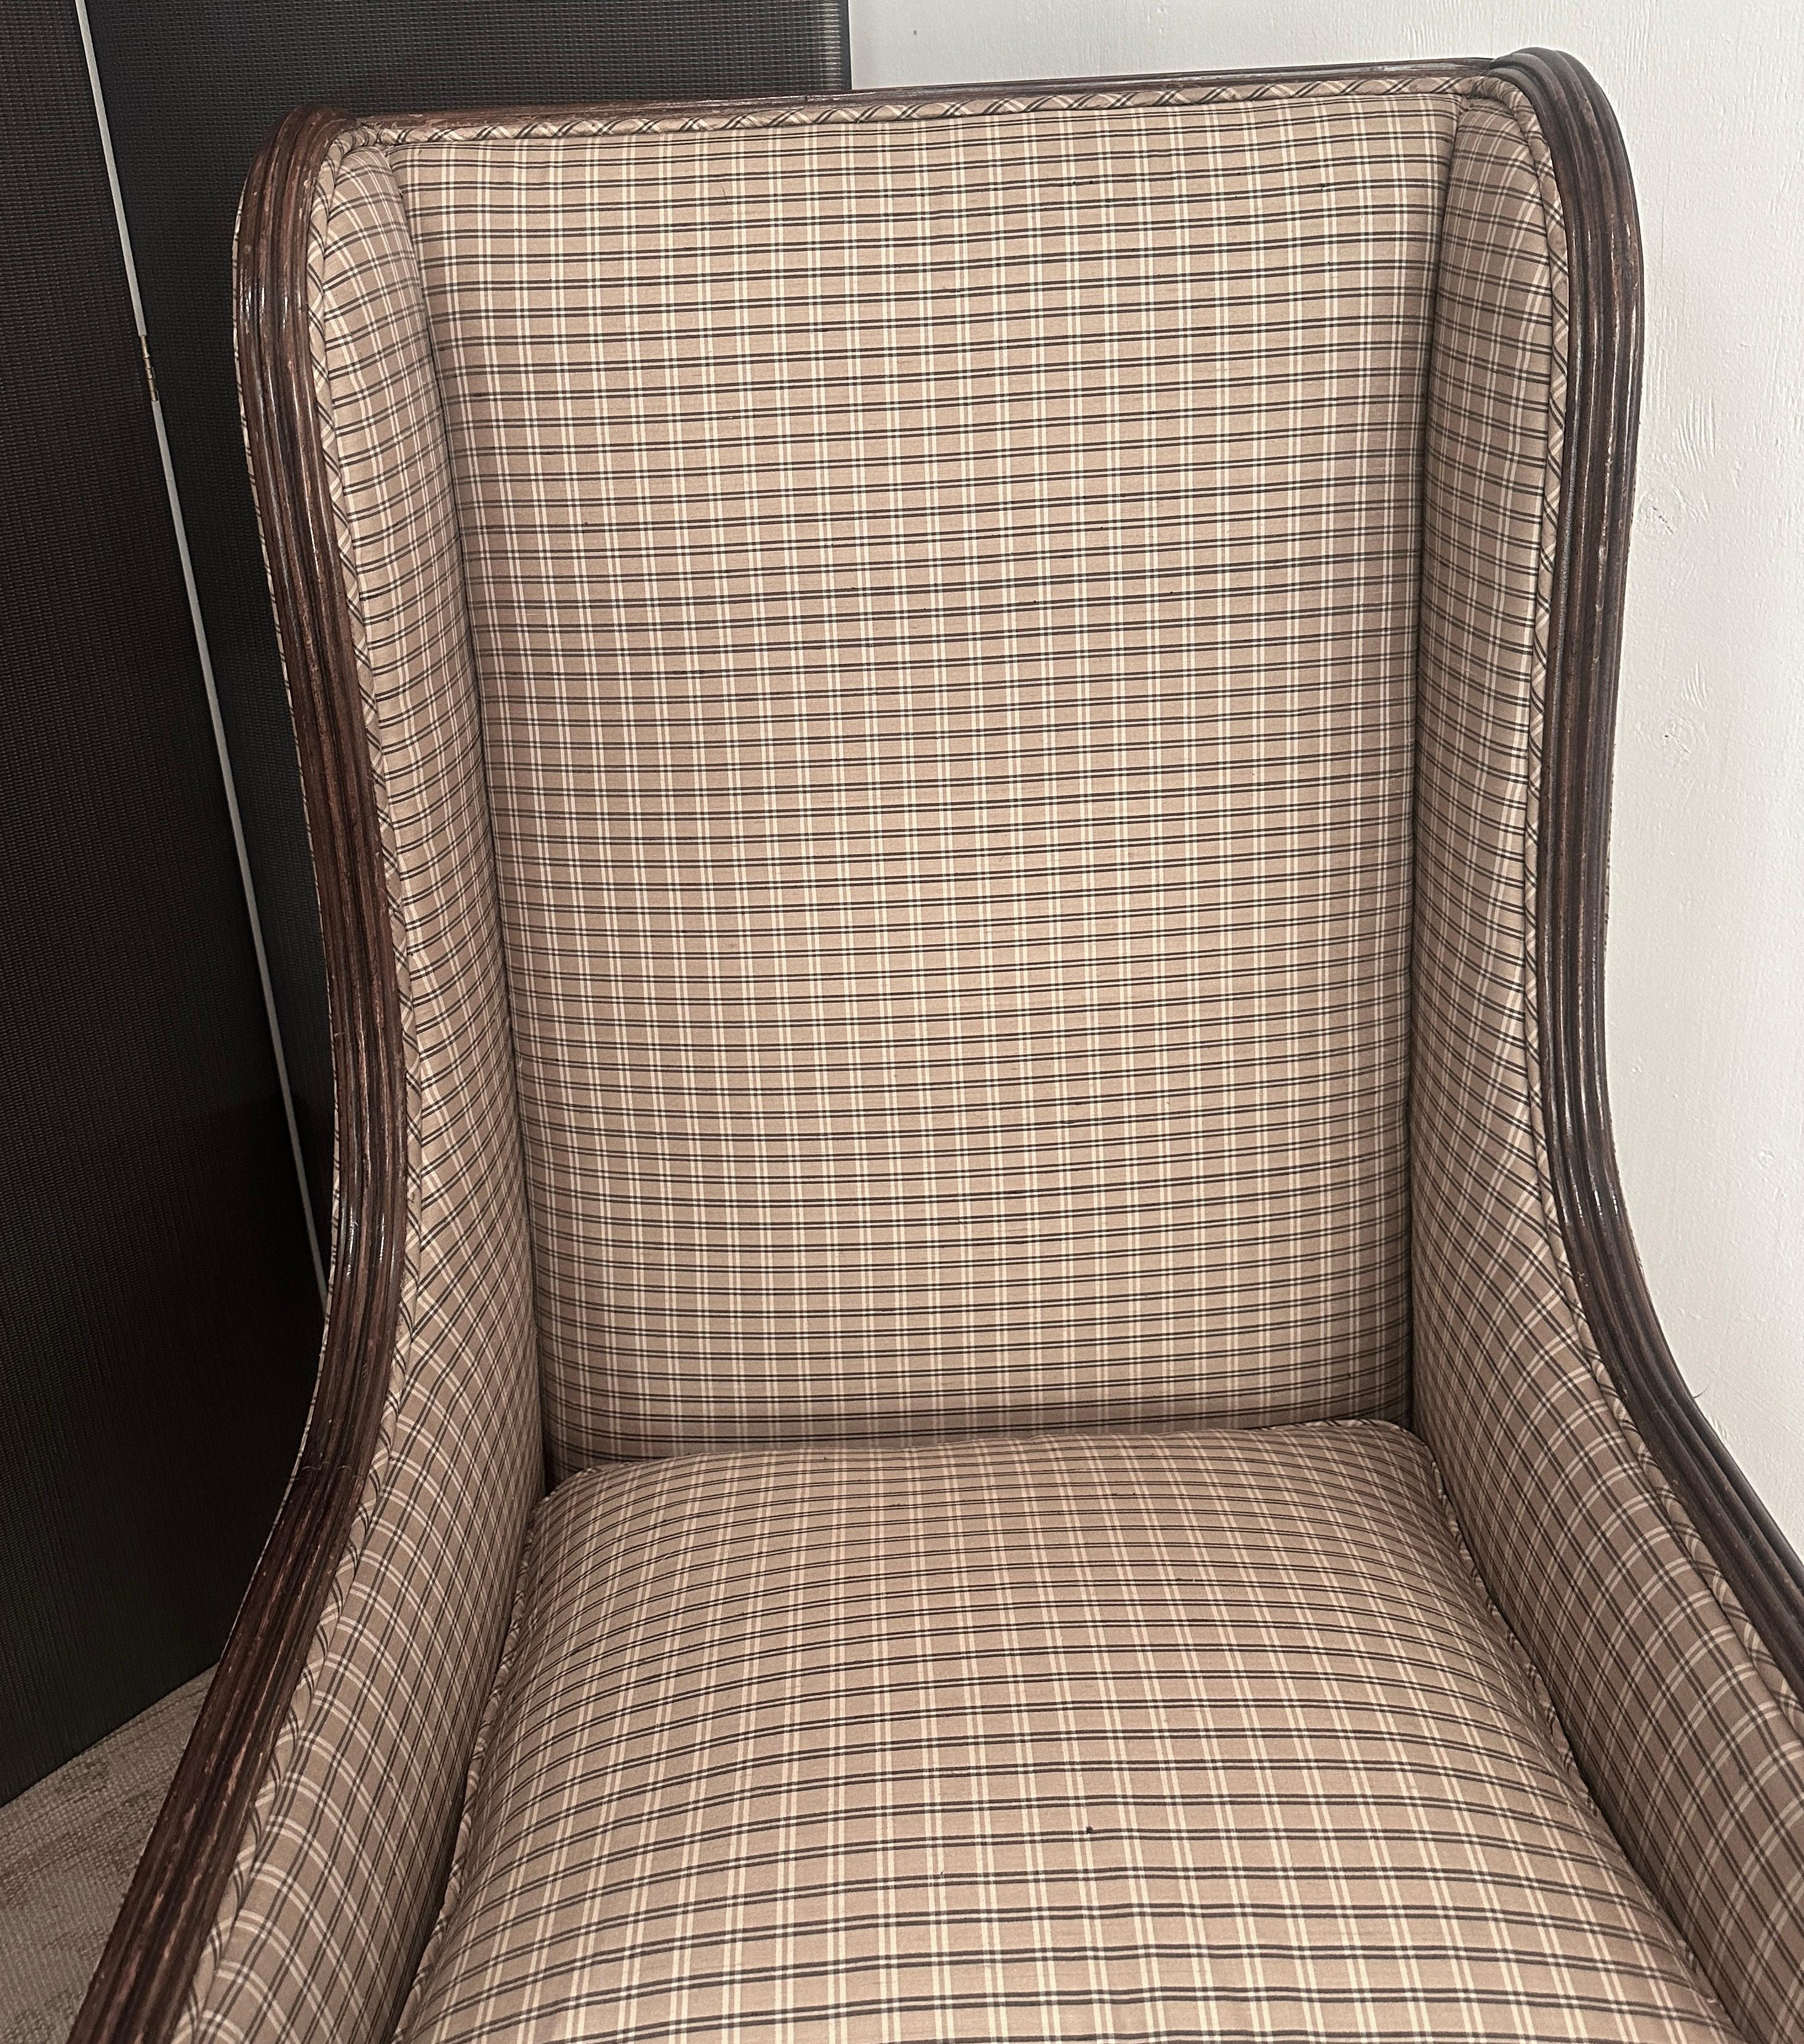 Louis XIII  Italian Lounge Chairs in Walnut -a pair - newly upholstered in Silk Plaid For Sale